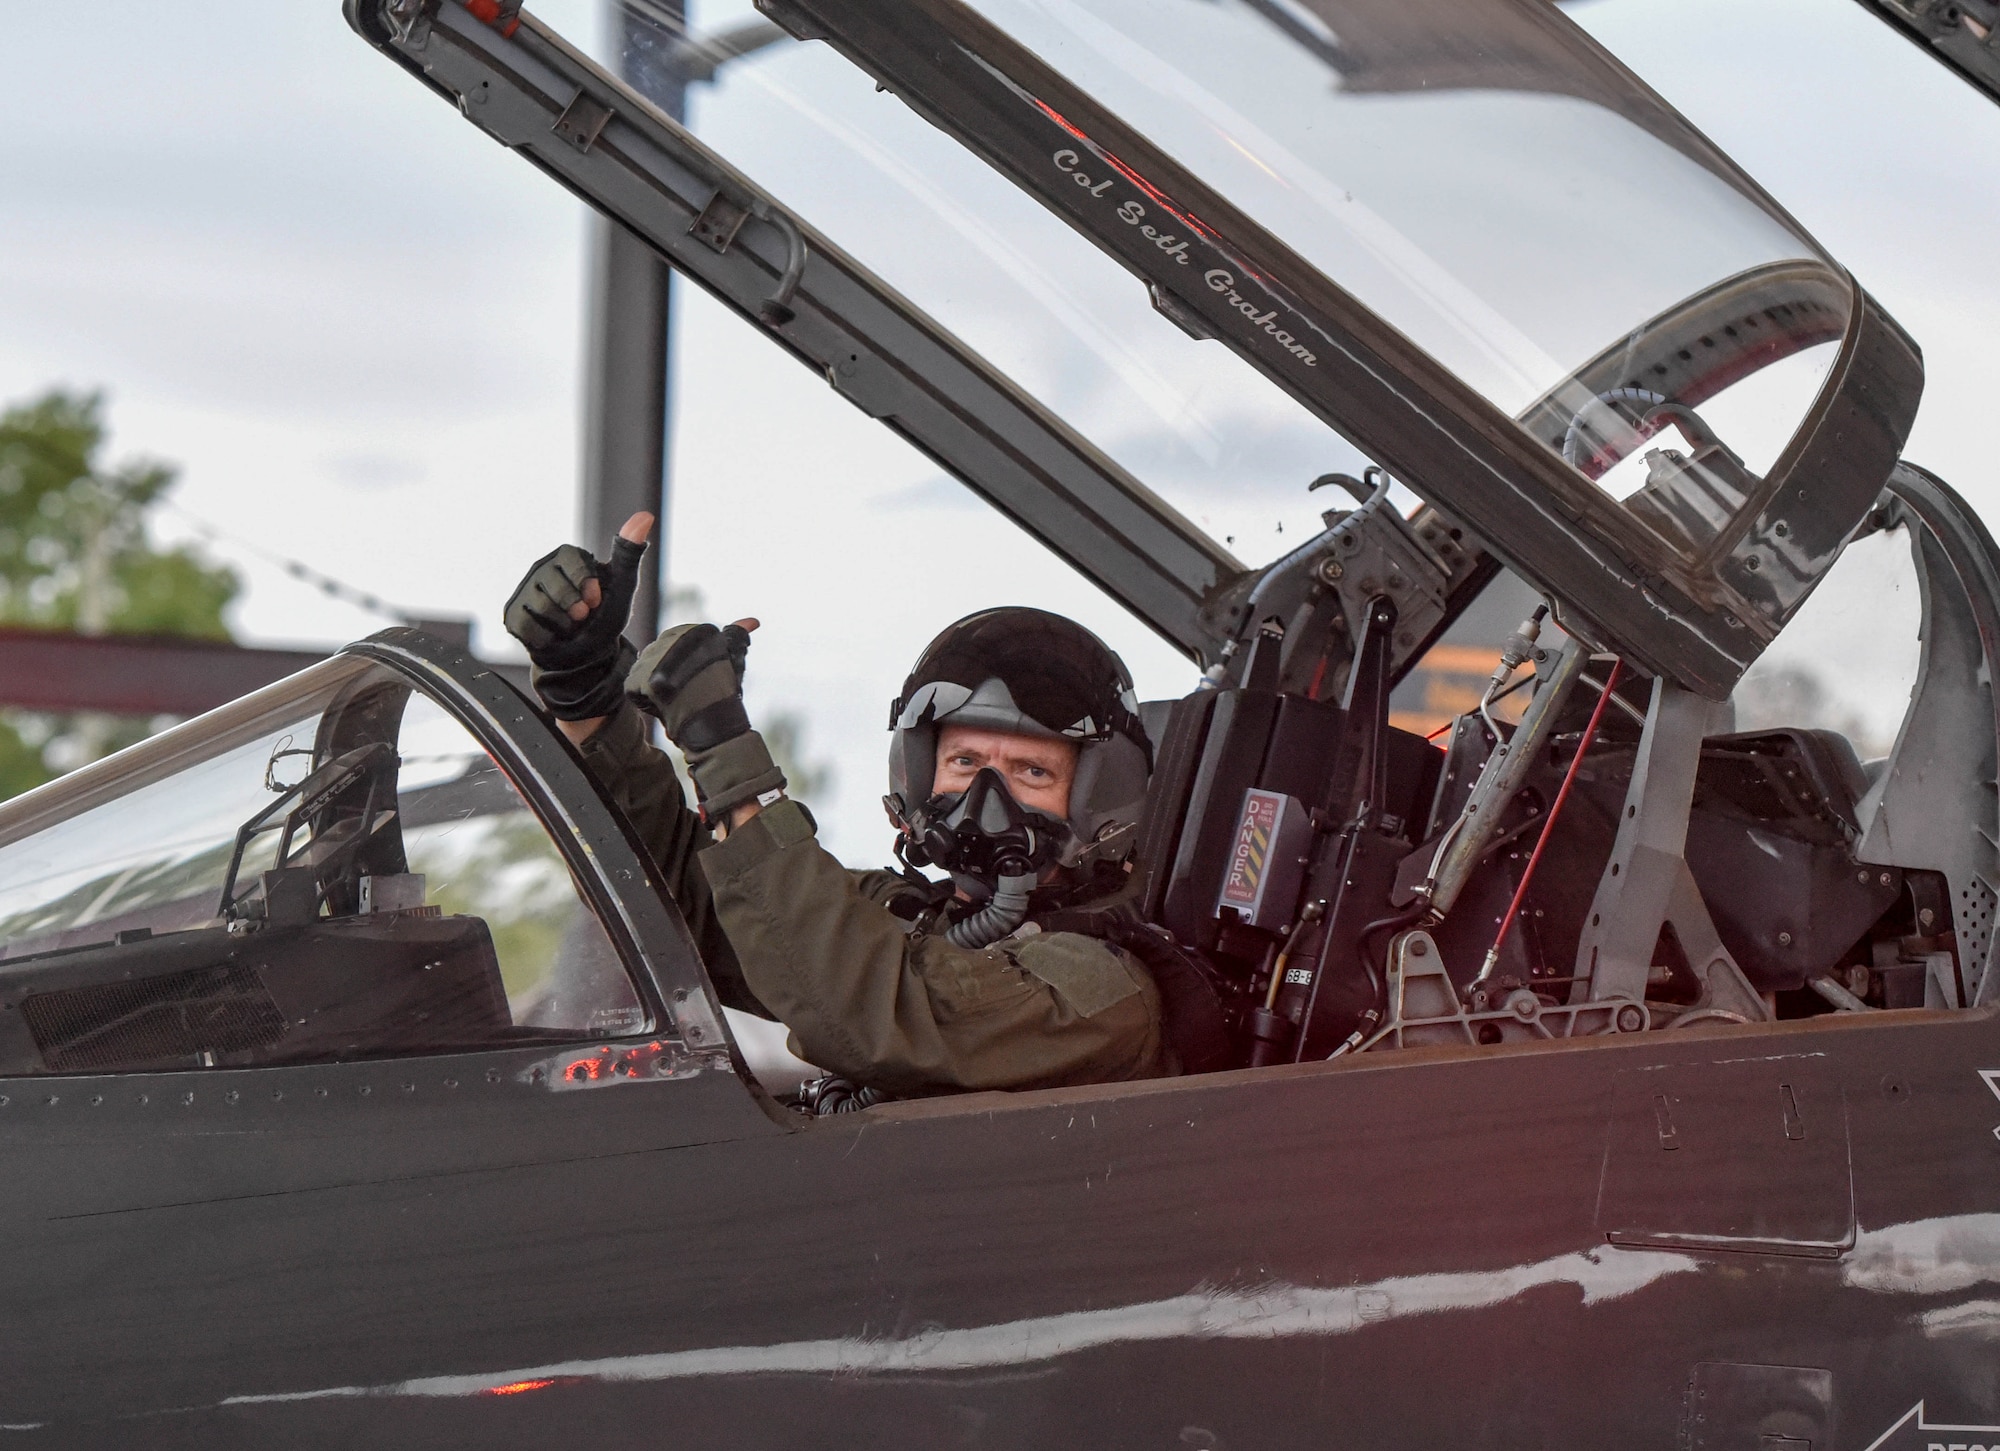 U.S. Air Force Lt. Col. David Easterling Jr., 43rd Flying Training Squadron instructor pilot, gives a thumbs up in the cockpit of a T-38 Talon on September 23, 2020, at Columbus Air Force Base, Miss. The T-38 can reach a speed of up to 912 mph. (U.S. Air Force photo by Airman 1st Class Davis Donaldson)